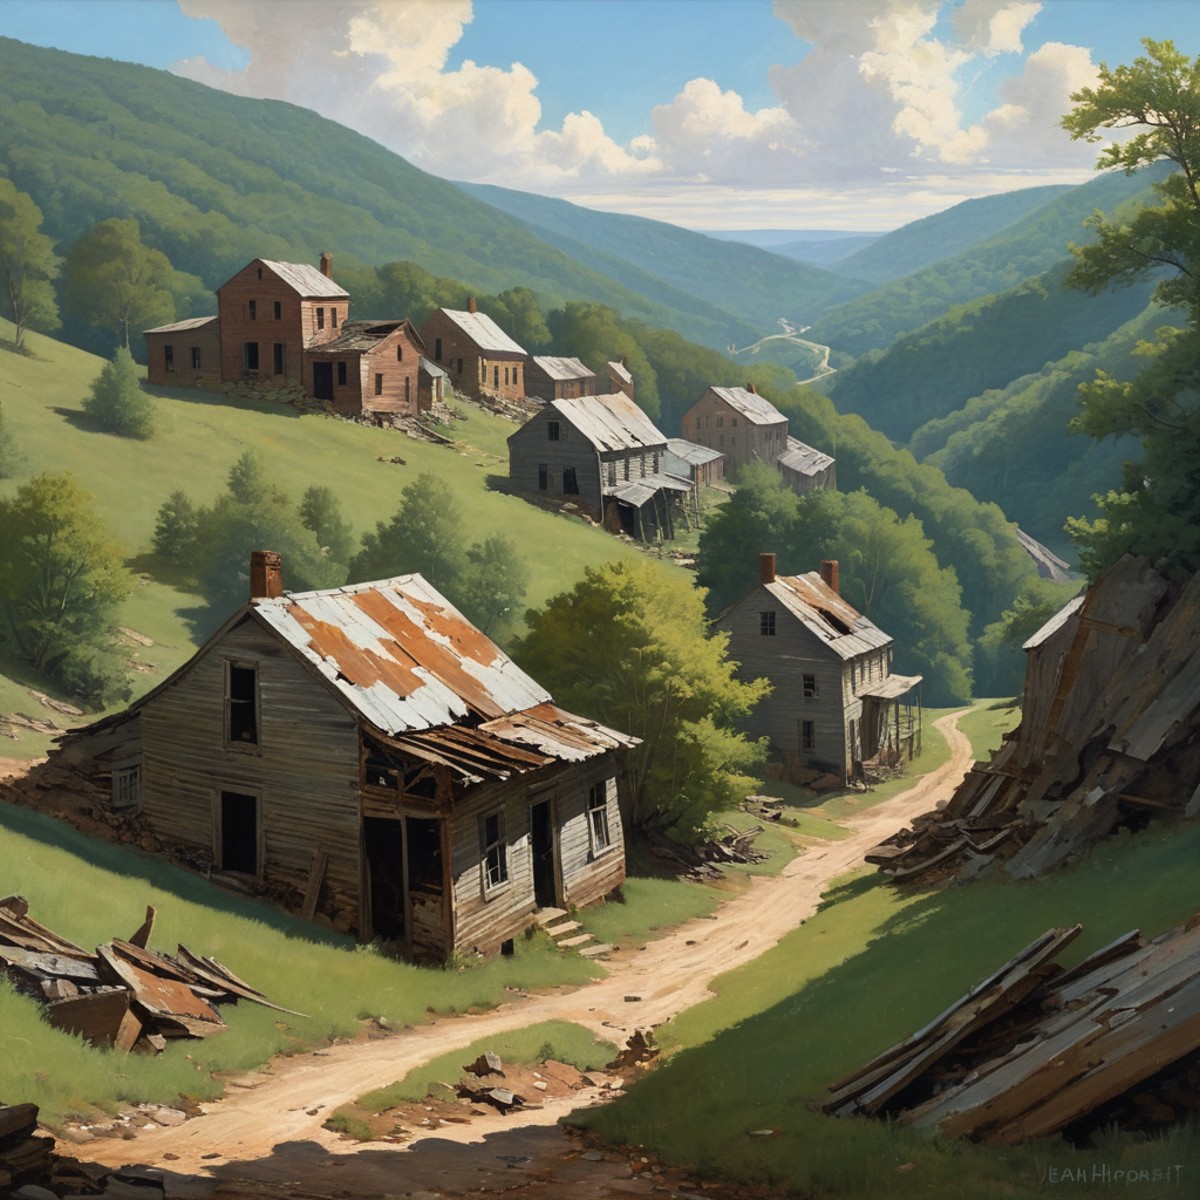 a classic landscape painting of an abandoned mining town in the hills of West Virginia, by Jean-HonorÃ© Fragonard and by É...